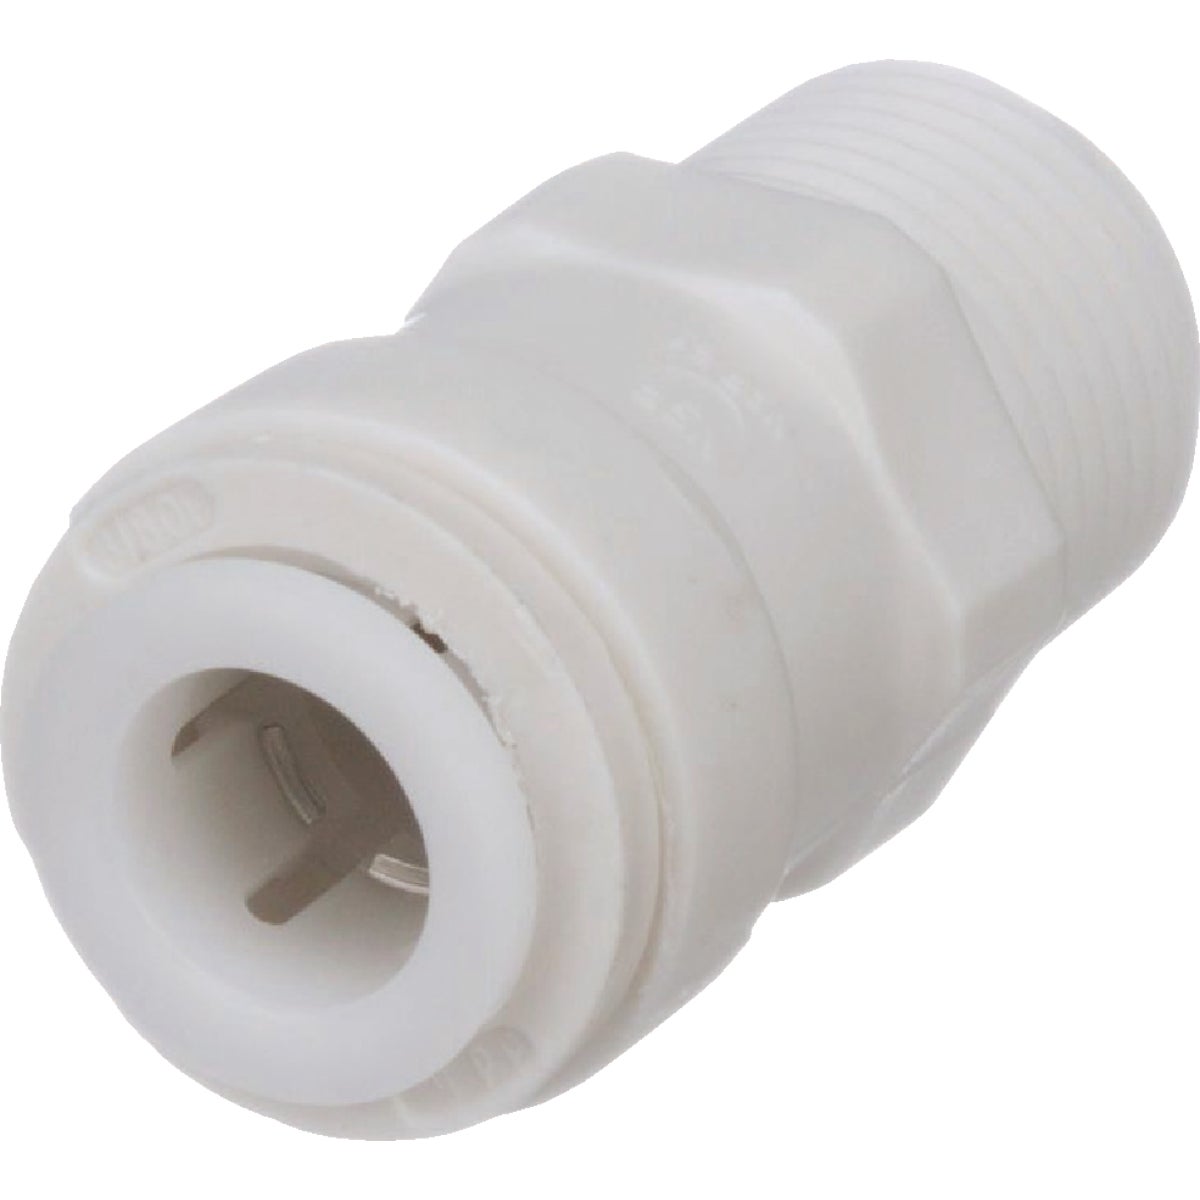 Watts Aqualock 3/8 In. OD x 3/8 In. MPT Push-to-Connect Plastic Adapter